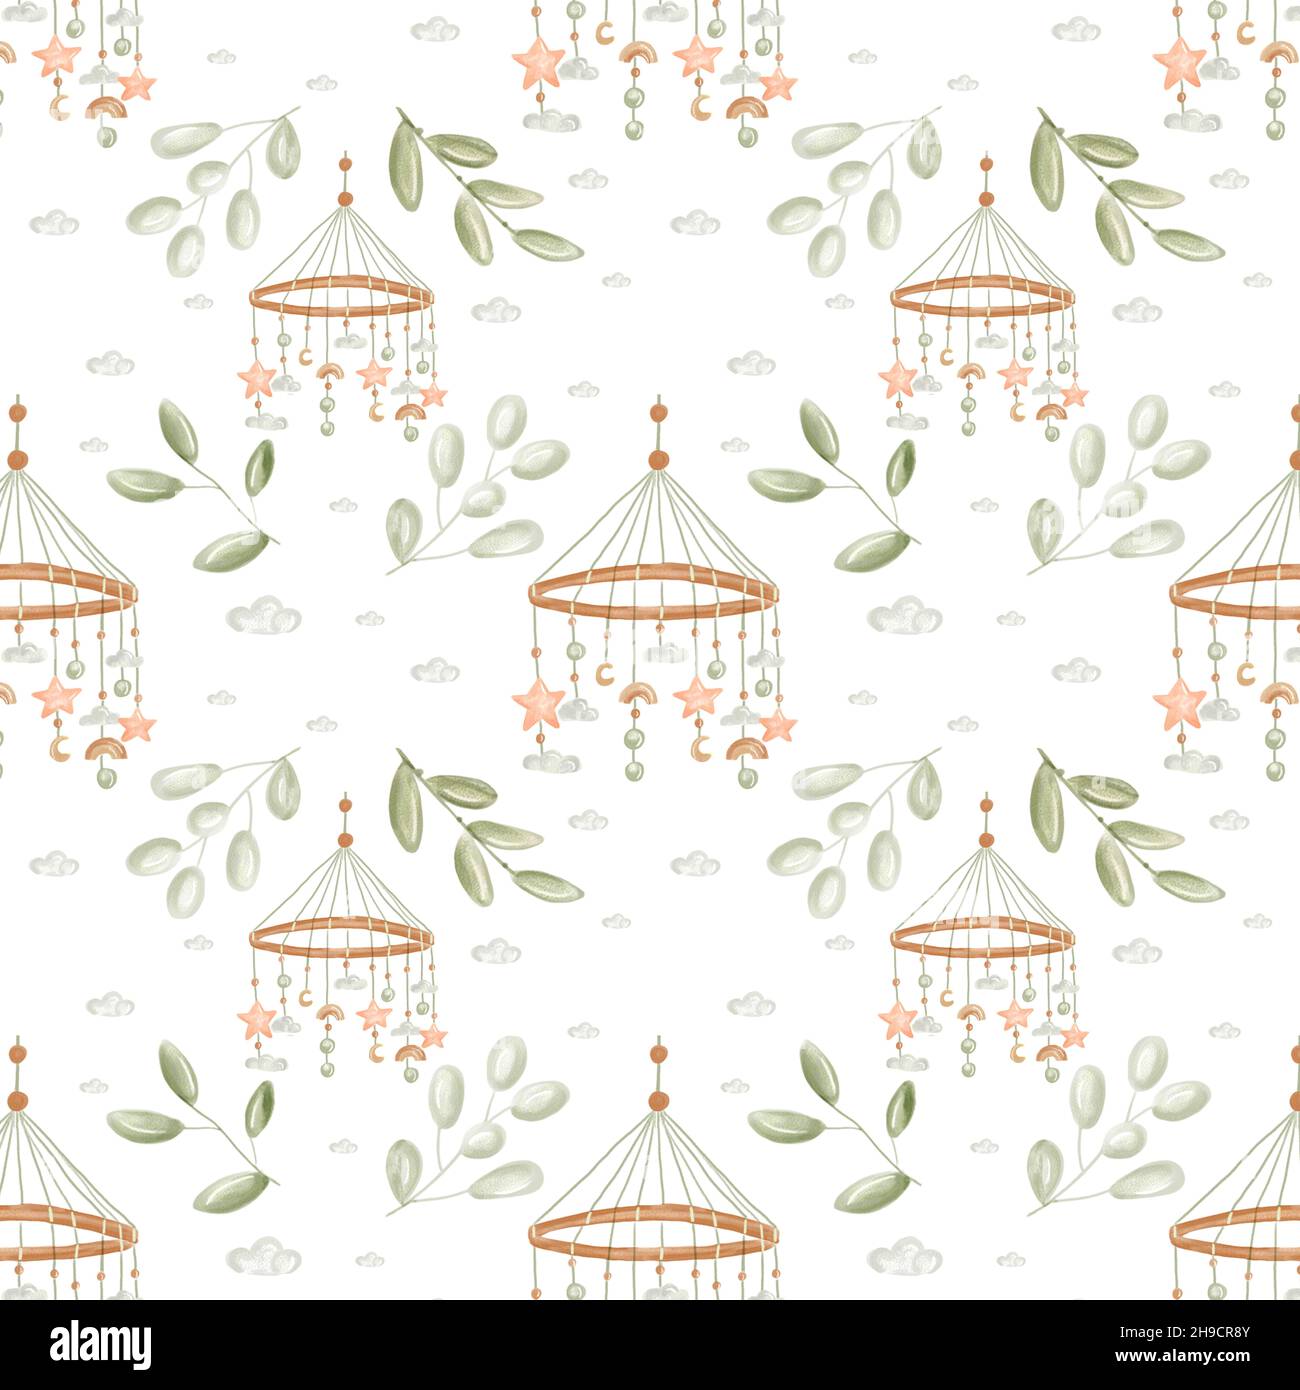 Watercolor elephants for nursery, seamless  pattern on white background. Cute baby elefants in boho style. Use for textile, nursery, wallpapers, wrapp Stock Photo